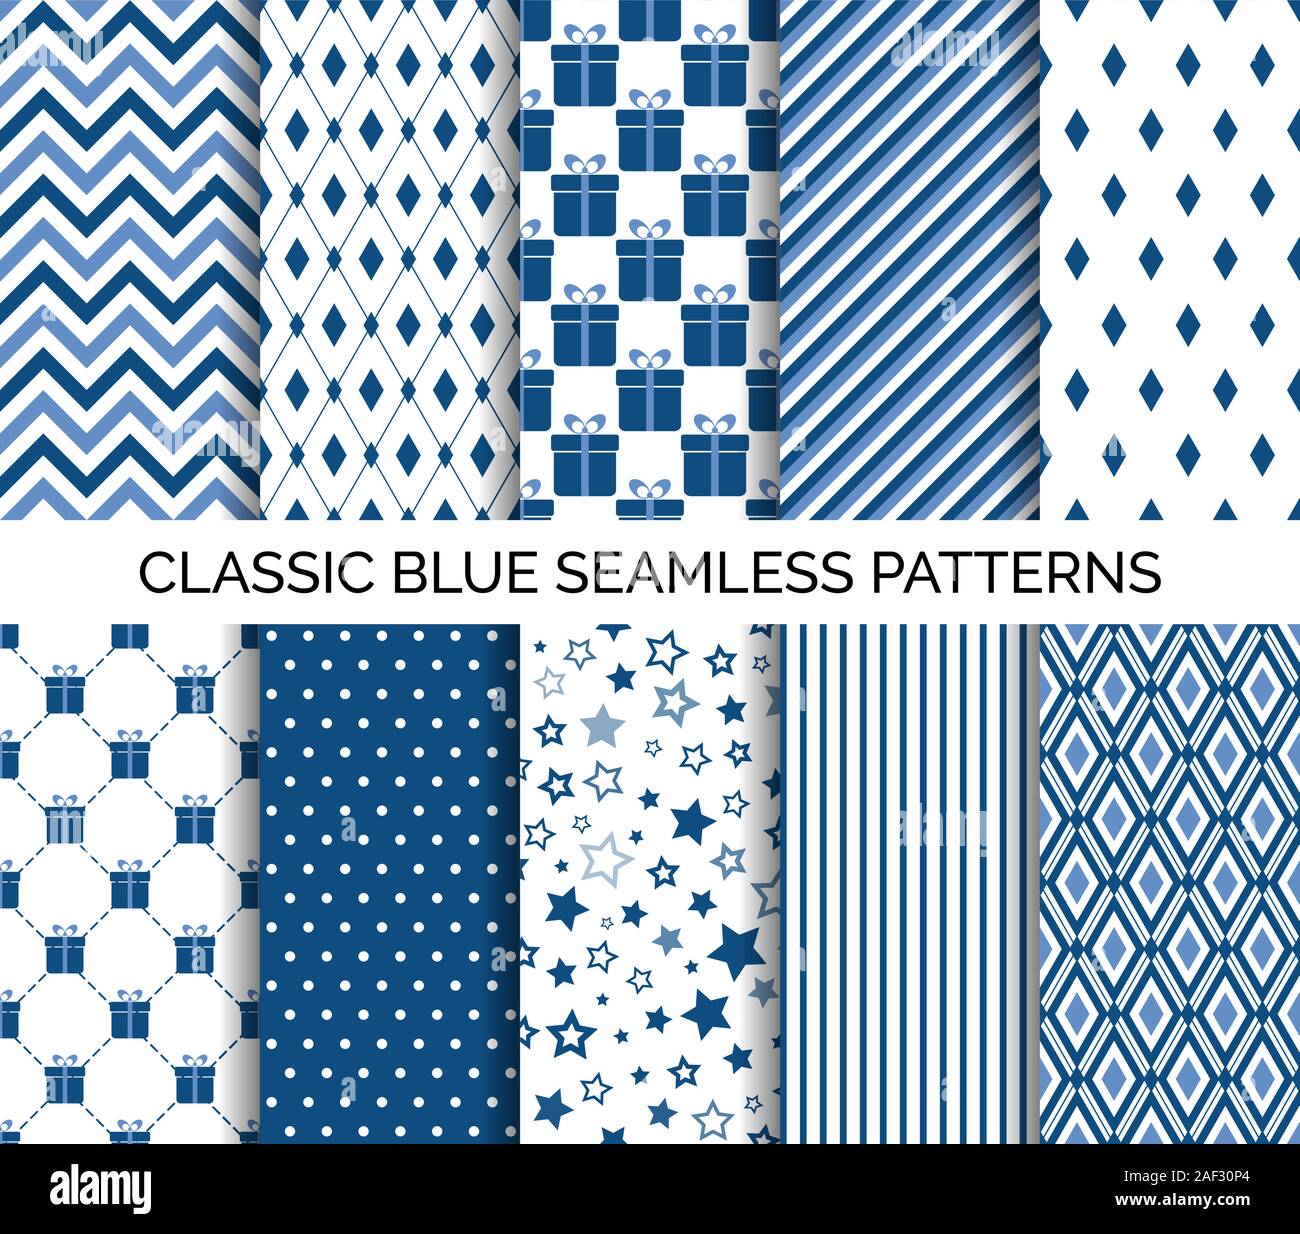 Set of classic blue seamless pattern. Vector abstract backgrounds. Chevron, polka dots, striped. For wallpaper design, wrapping paper, fabric print Stock Vector